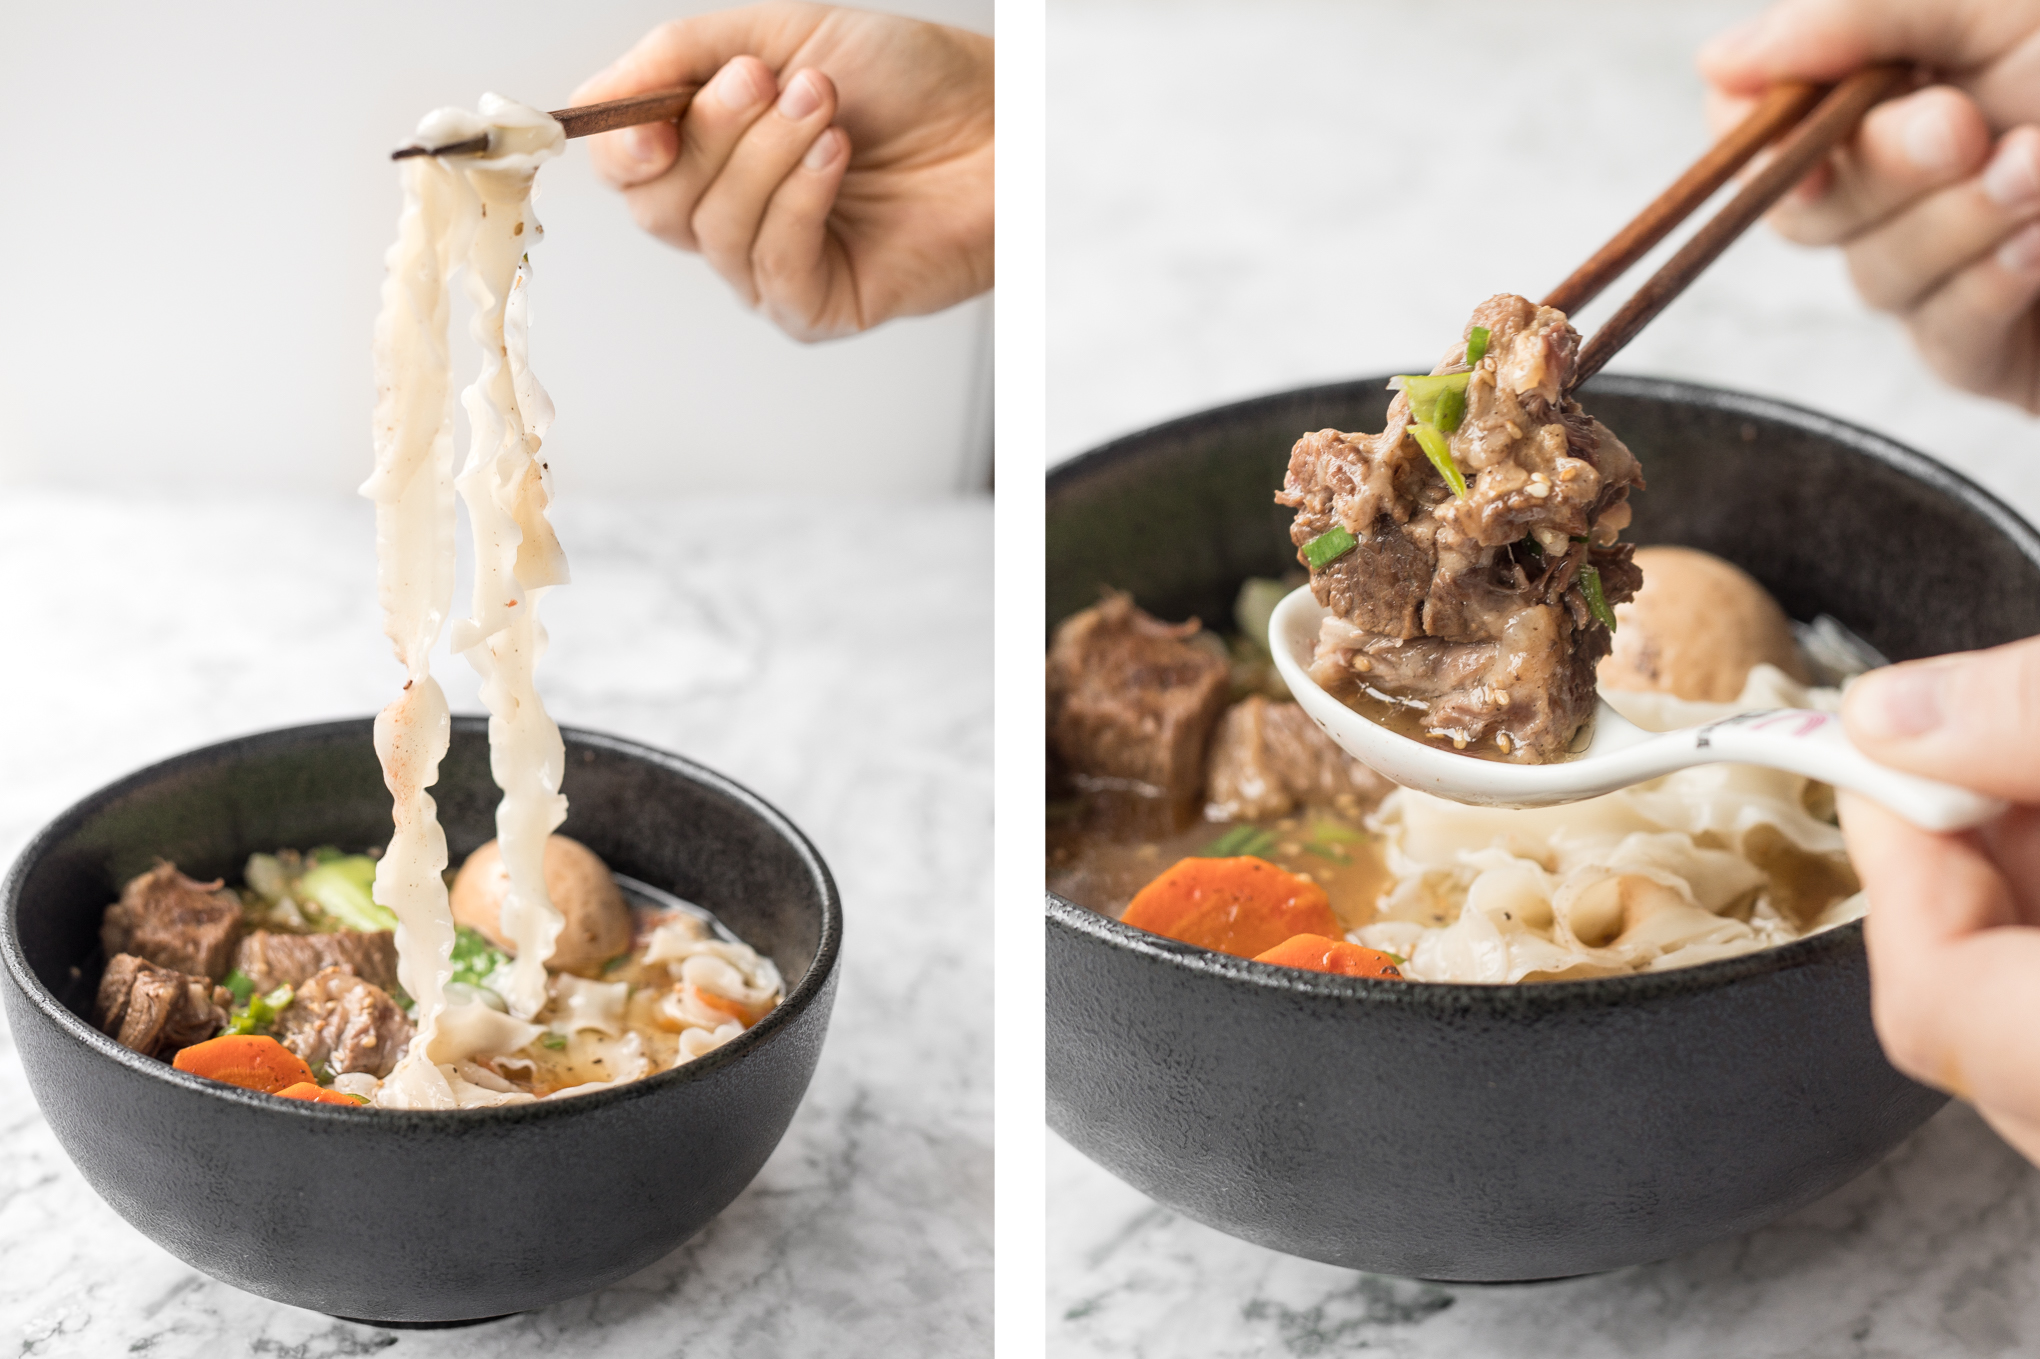 An easy weeknight dinner option, this hearty and oily slow cooker Asian beef noodle soup is packed with beef chunks, vegetables, noodles, and Asian spices and flavours. | aheadofthyme.com